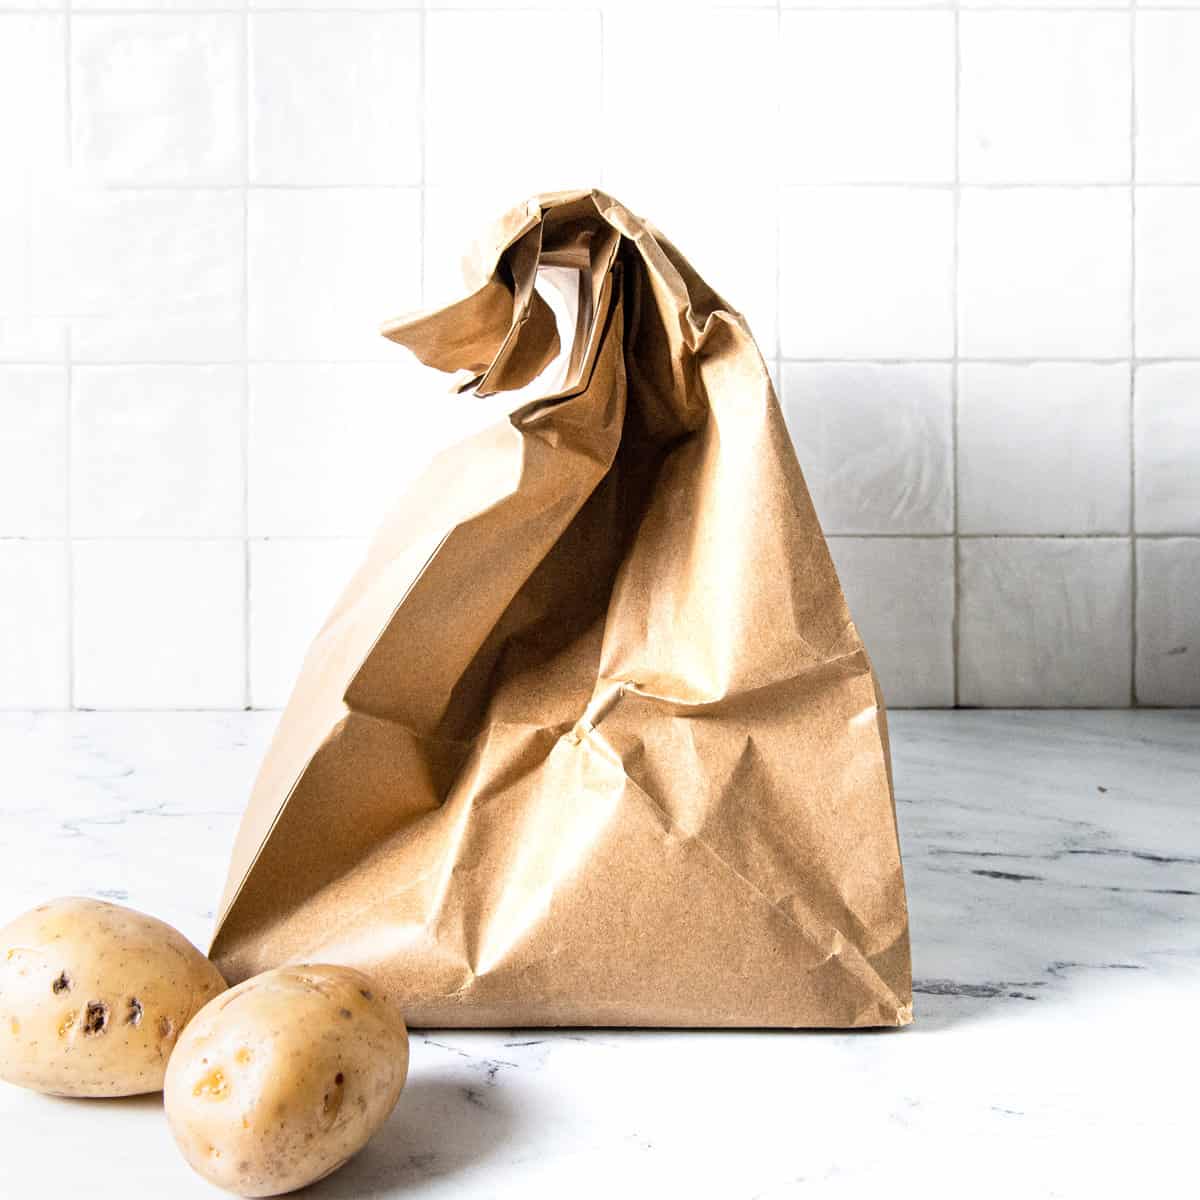 Potatoes in a brown bag with two potatoes next to it.